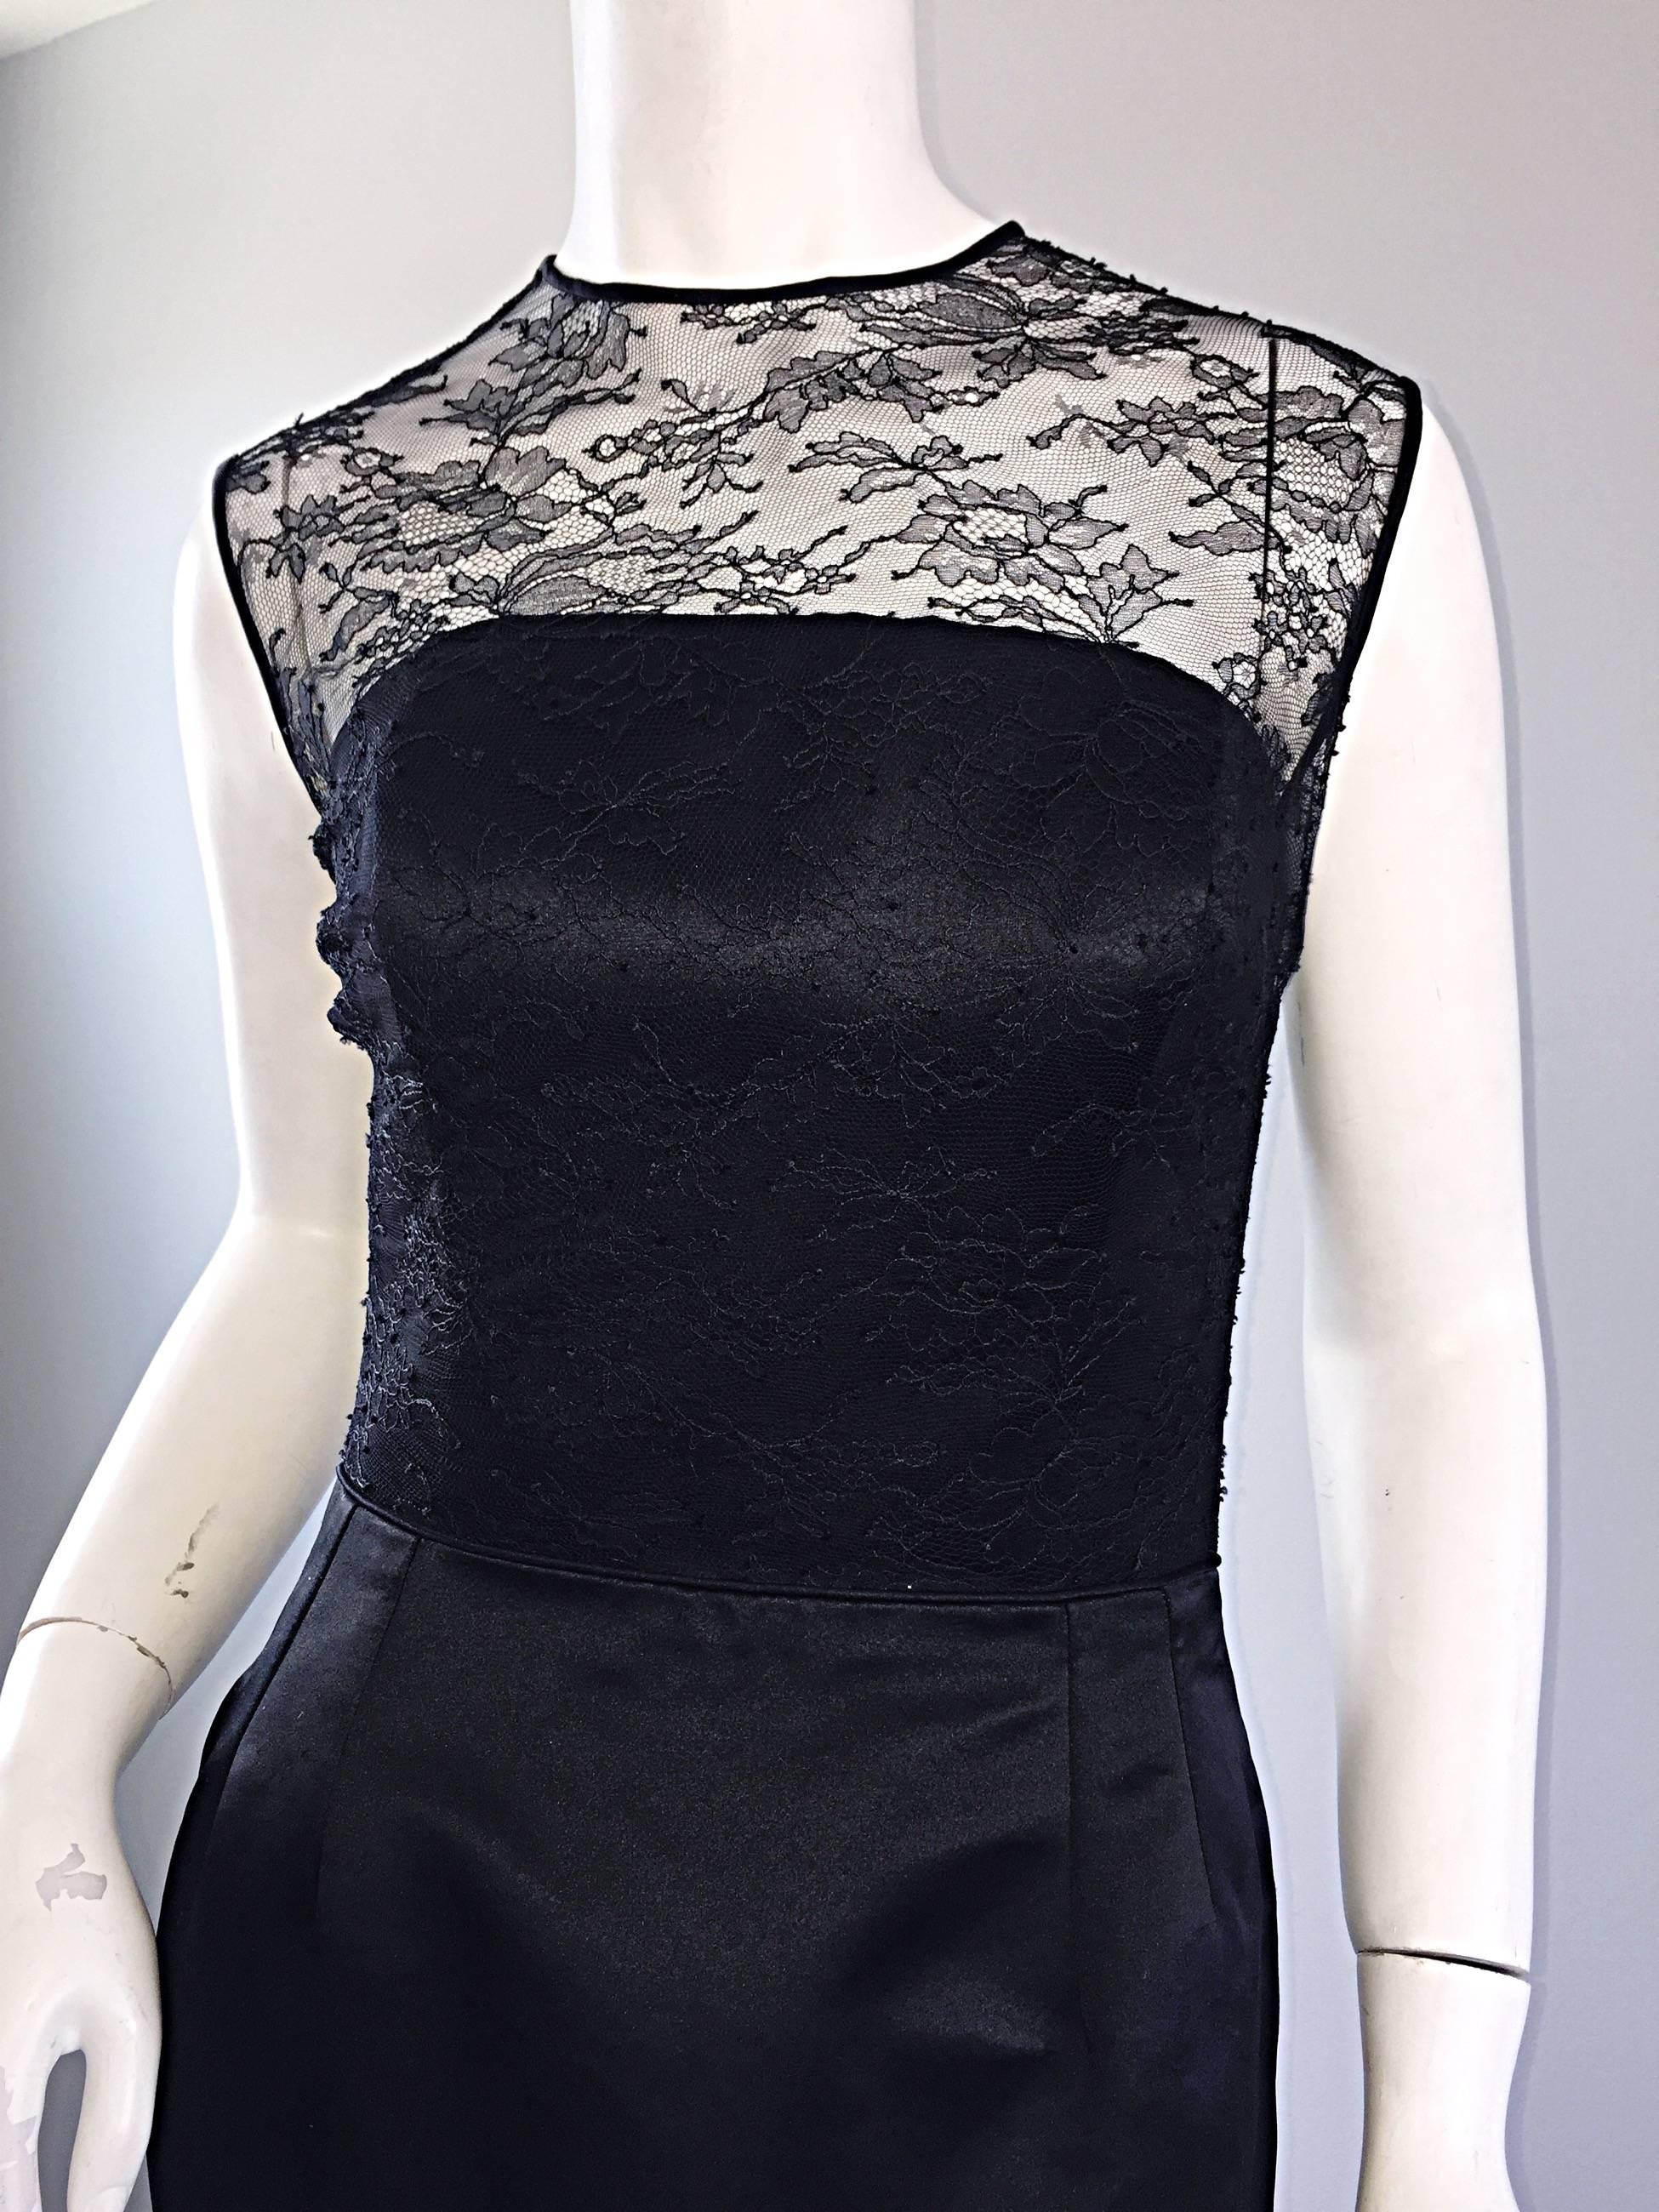 Women's 1990s Carlos Marquez Black Silk Vintage 90s Wiggle Dress w/ Lace Overlay LBD For Sale